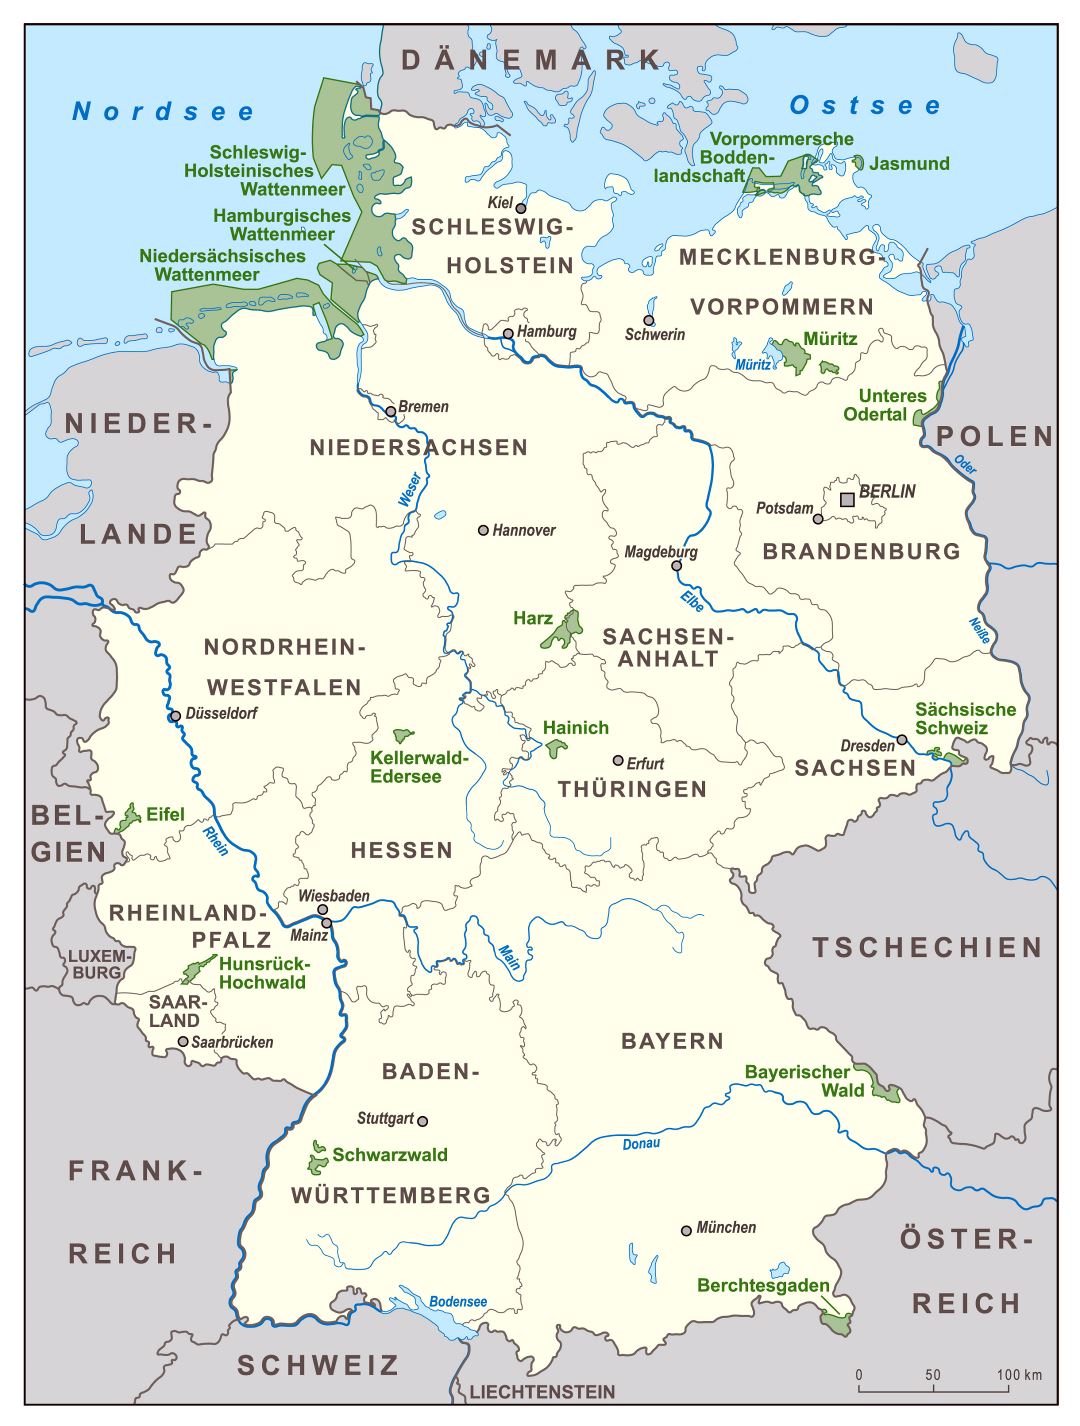 Large scale national parks map of Germany